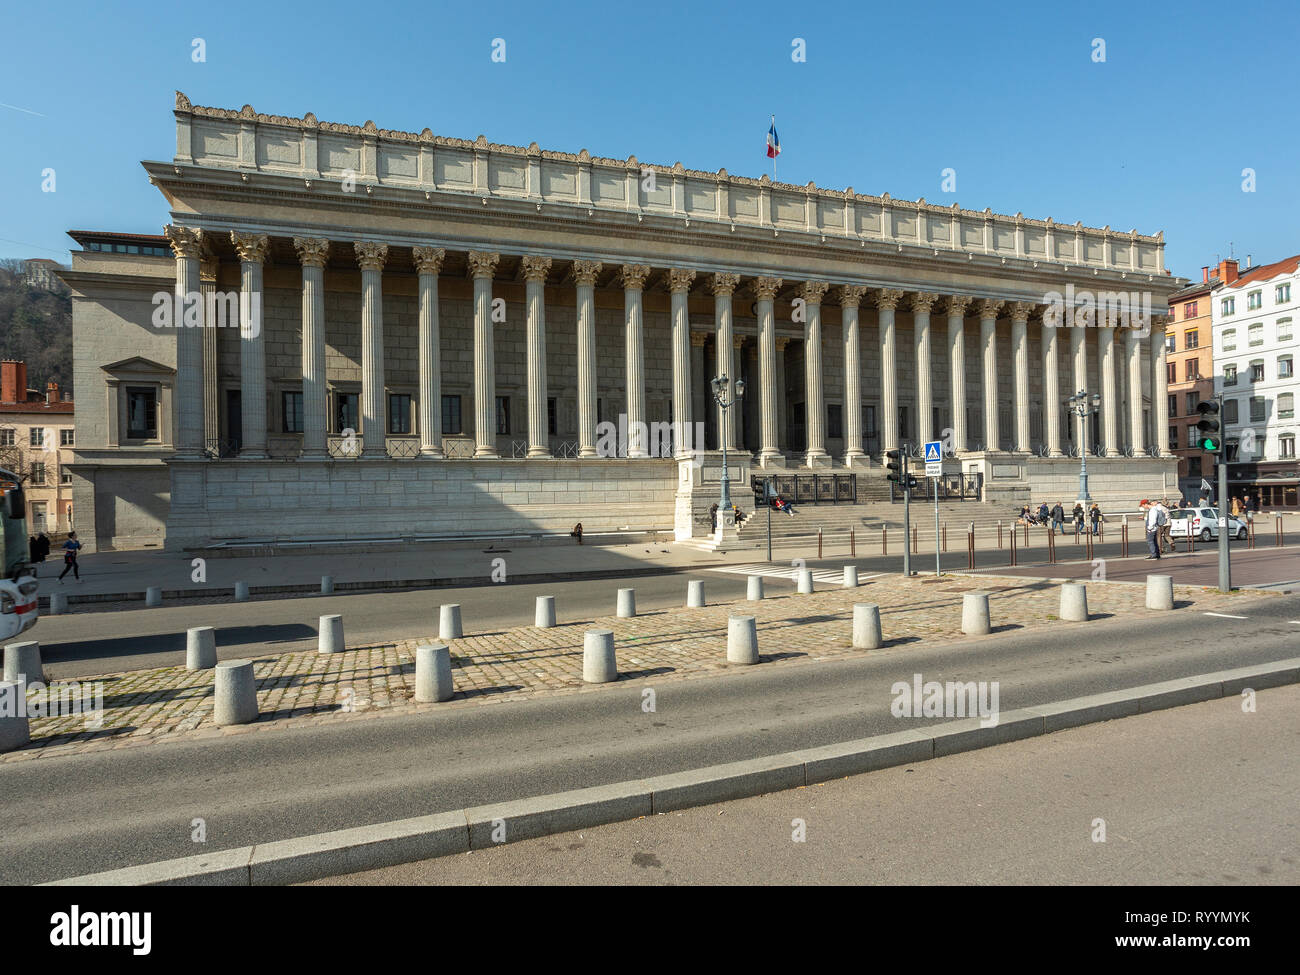 The Palais of justice in Lyon, France Stock Photo